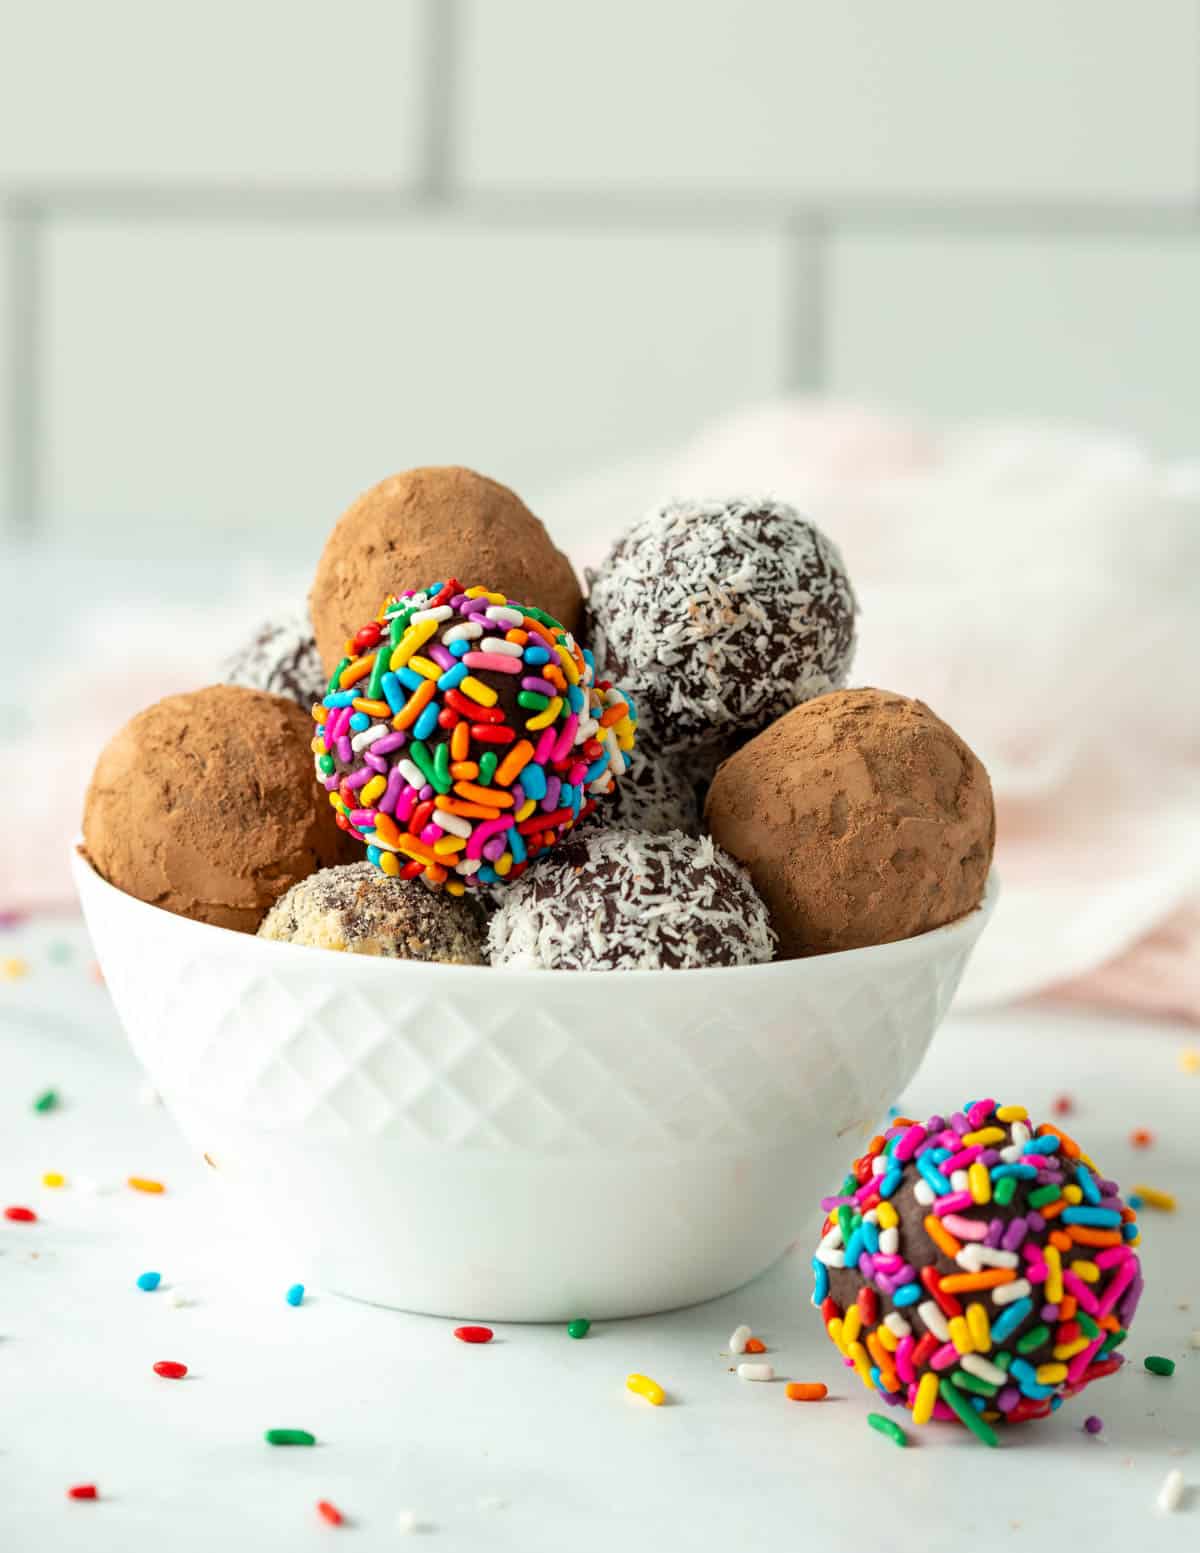 Vegan truffles in a small white bowl covered in assorted coatings: cocoa powder, coconut flakes, nuts, and sprinkles.